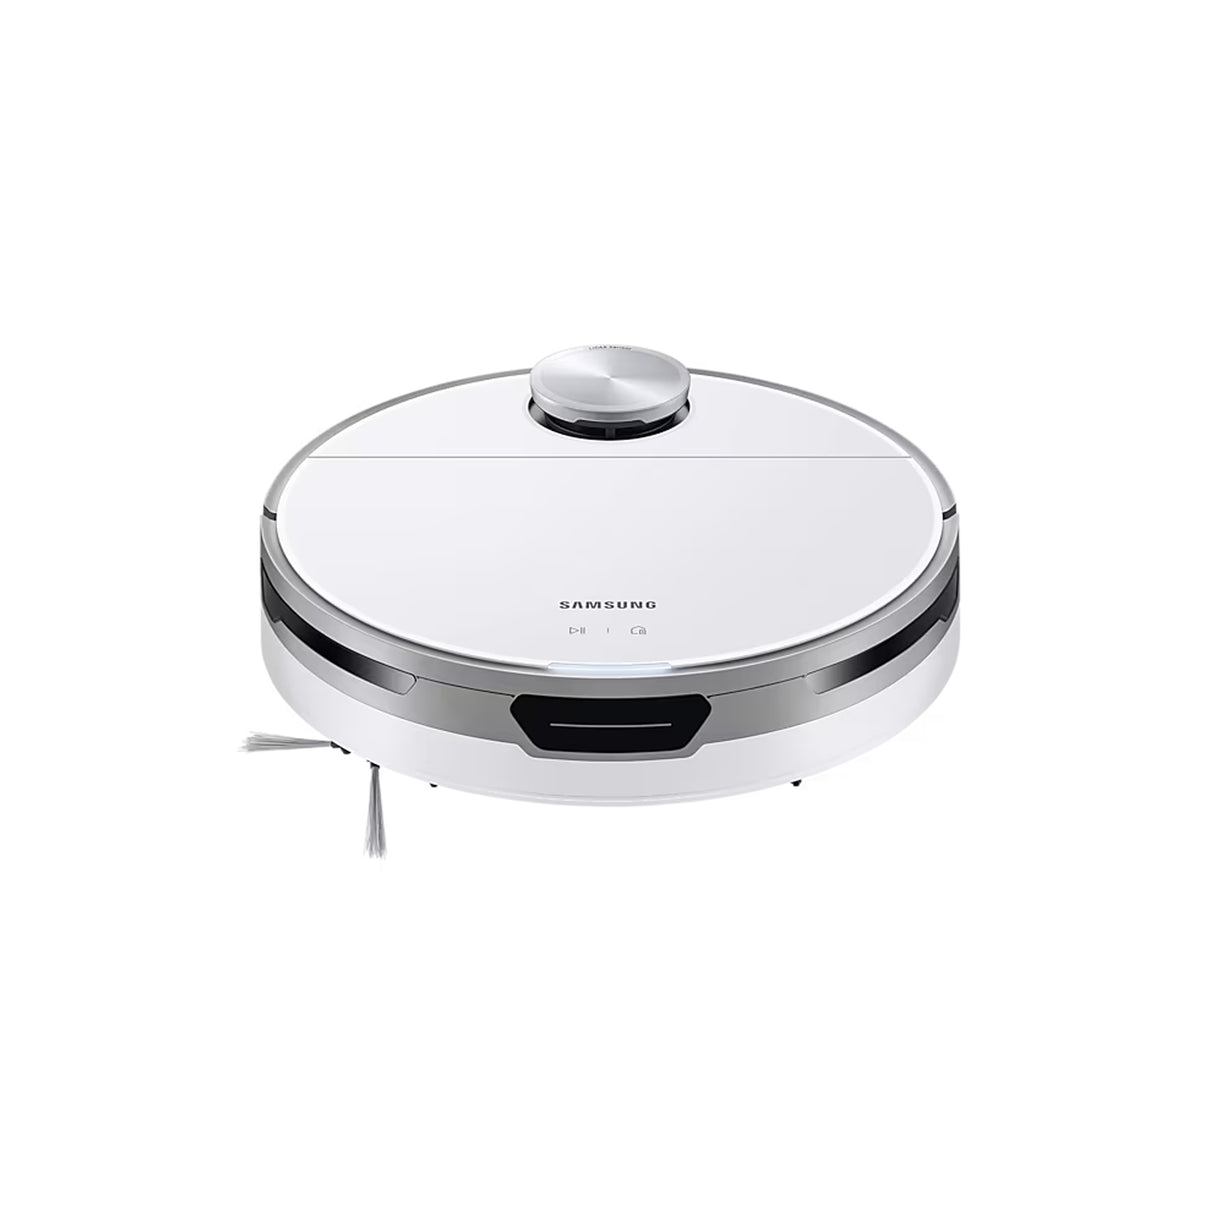 Samsung Jet Bot+ - Robot Vacuum with Clean Station, Automatic Emptying, Precision Cleaning, 5 Layer HEPA Filter, Intelligent Power Control